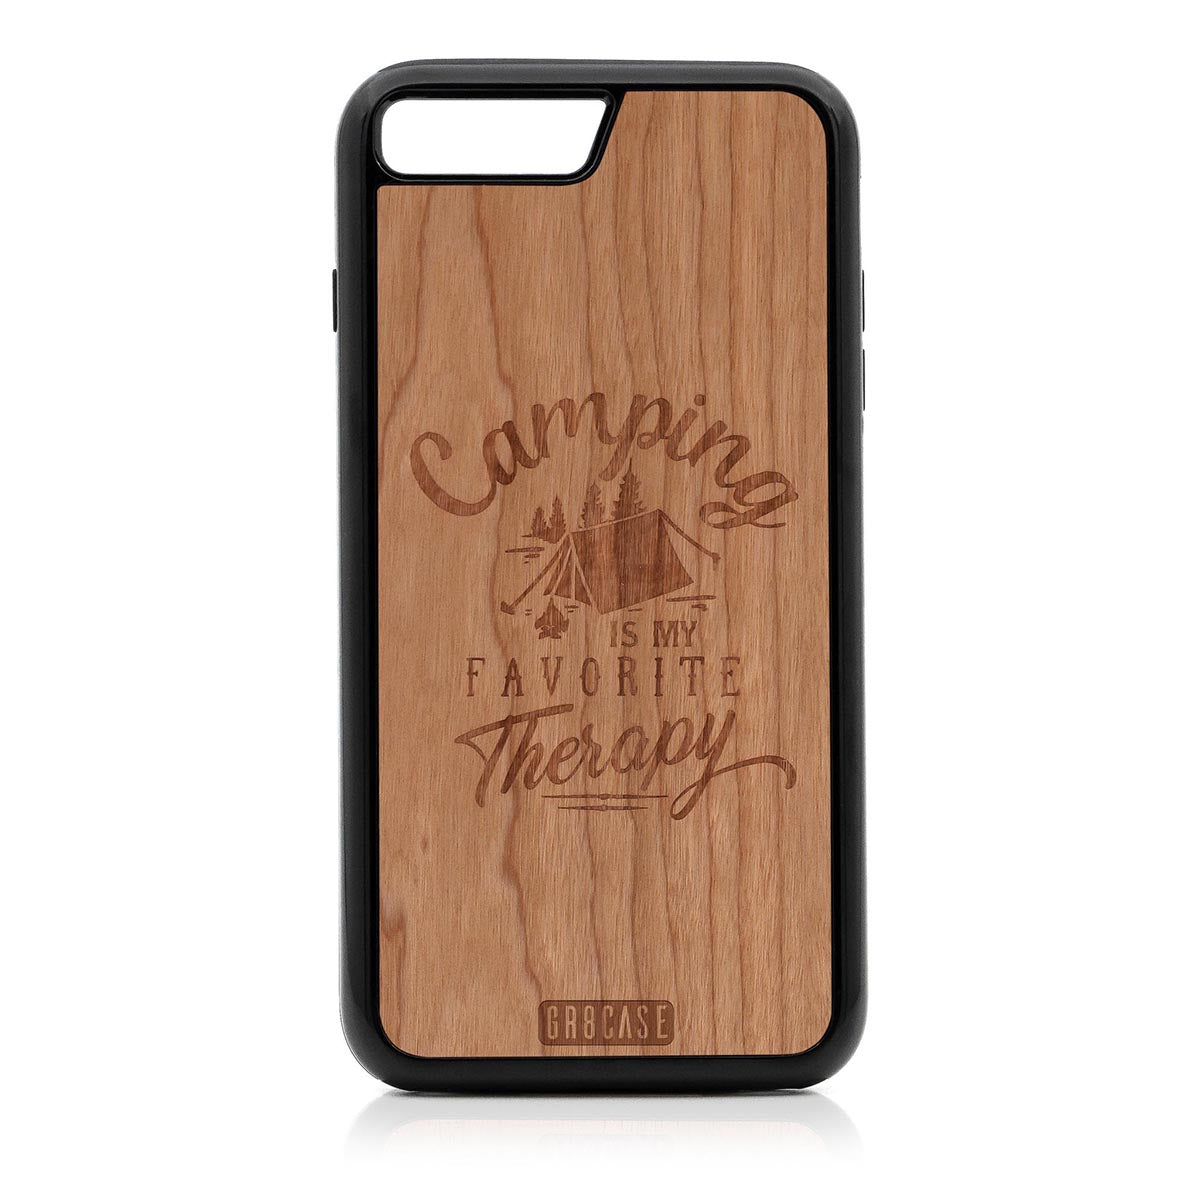 Camping Is My Favorite Therapy Design Wood Case For iPhone 7 Plus / 8 Plus by GR8CASE